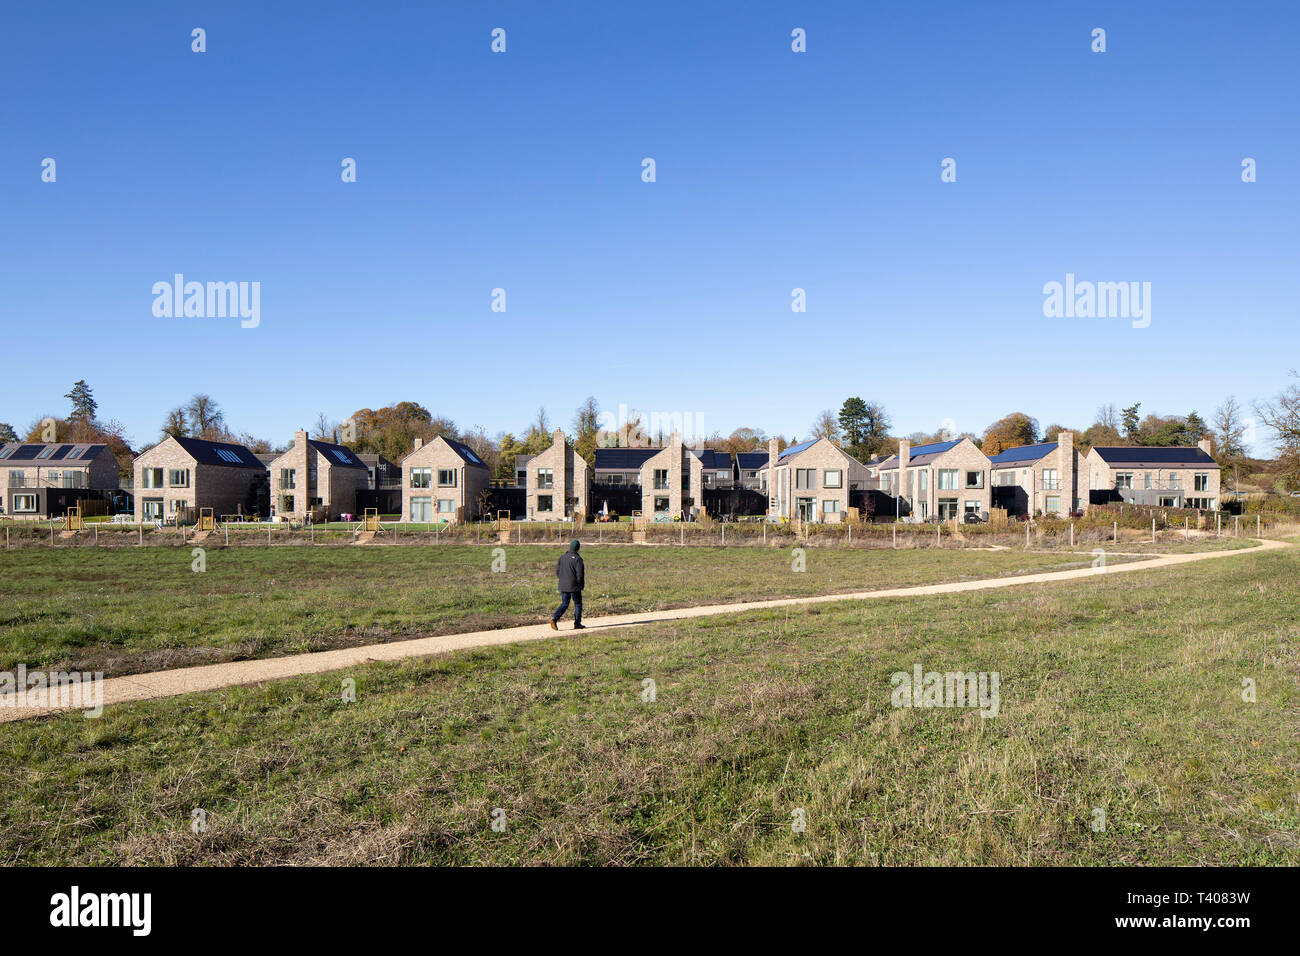 Wide view of housing across meadow. Lovedon Lane, Kings Worthy, United Kingdom. Architect: John Pardey Architects & HAB, 2018. Stock Photo